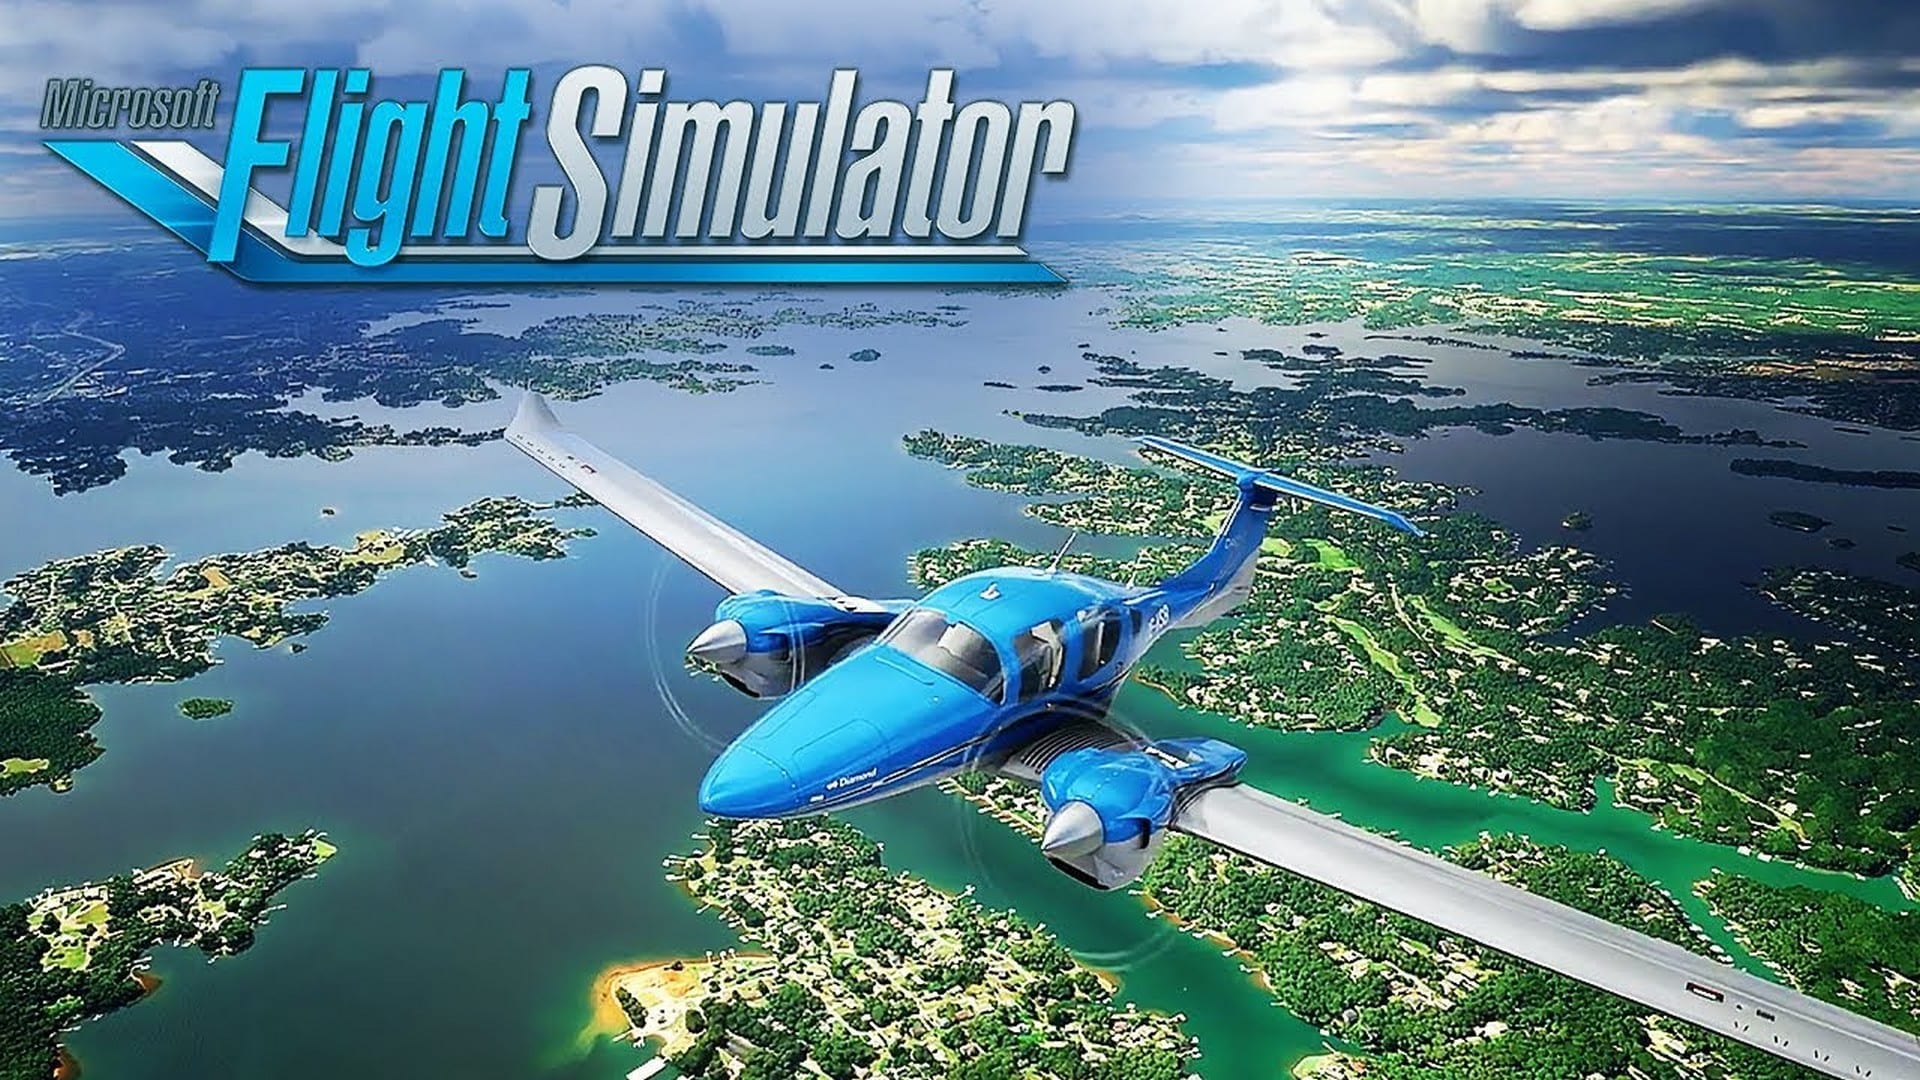 Microsoft Flight Simulator Is The Biggest Game Launch In Xbox Game Pass For PC History With Over 1 Million Players To Date